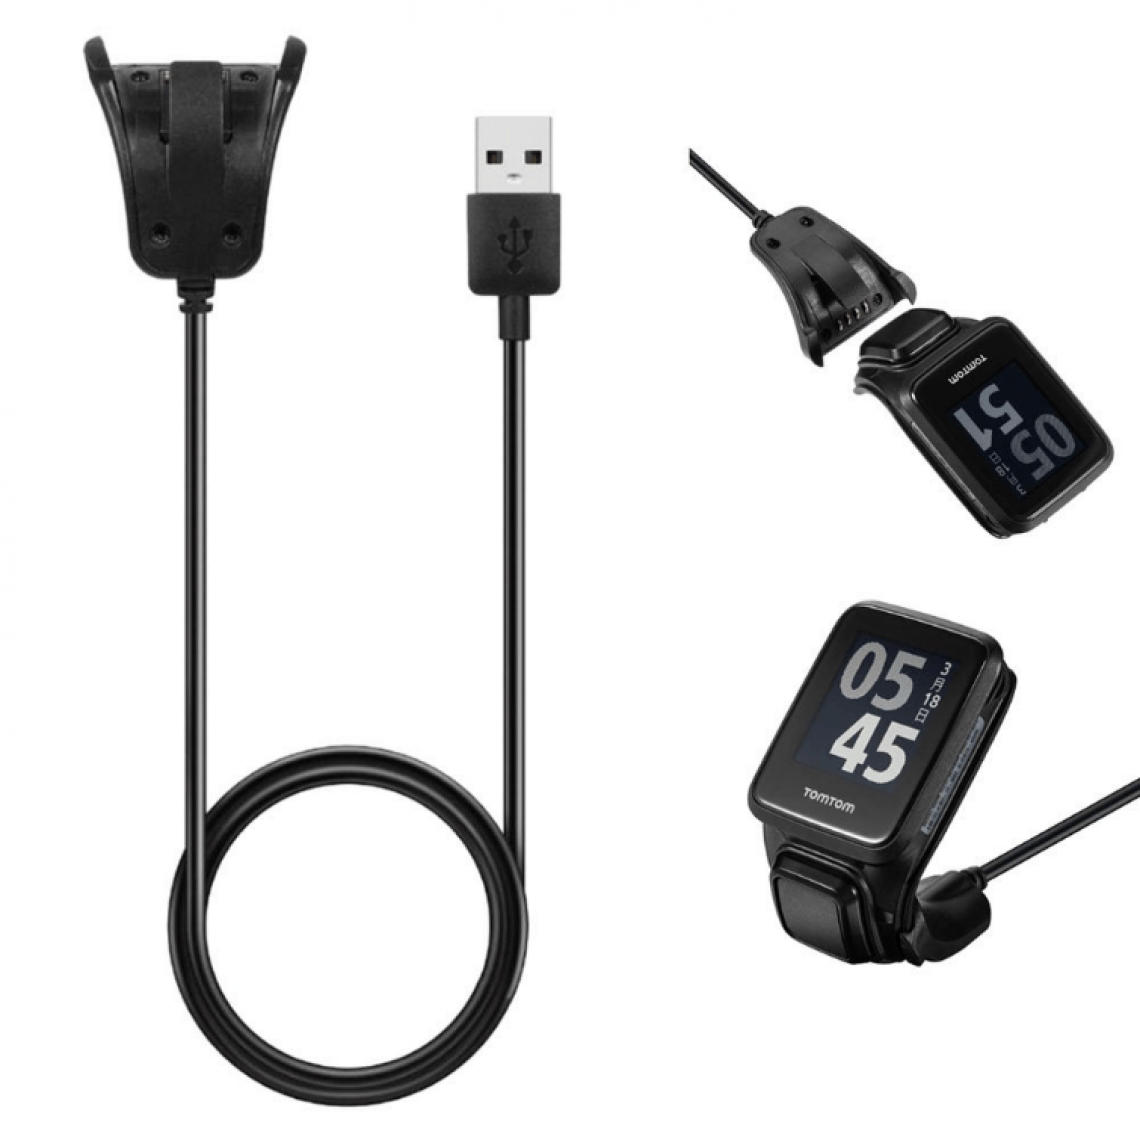 Phonecare - Câble Chargeur USB Smartwatch - Tomtom Spark 3 / Tomtom Runner 3 / Tom Tom Adventure - Autres accessoires smartphone